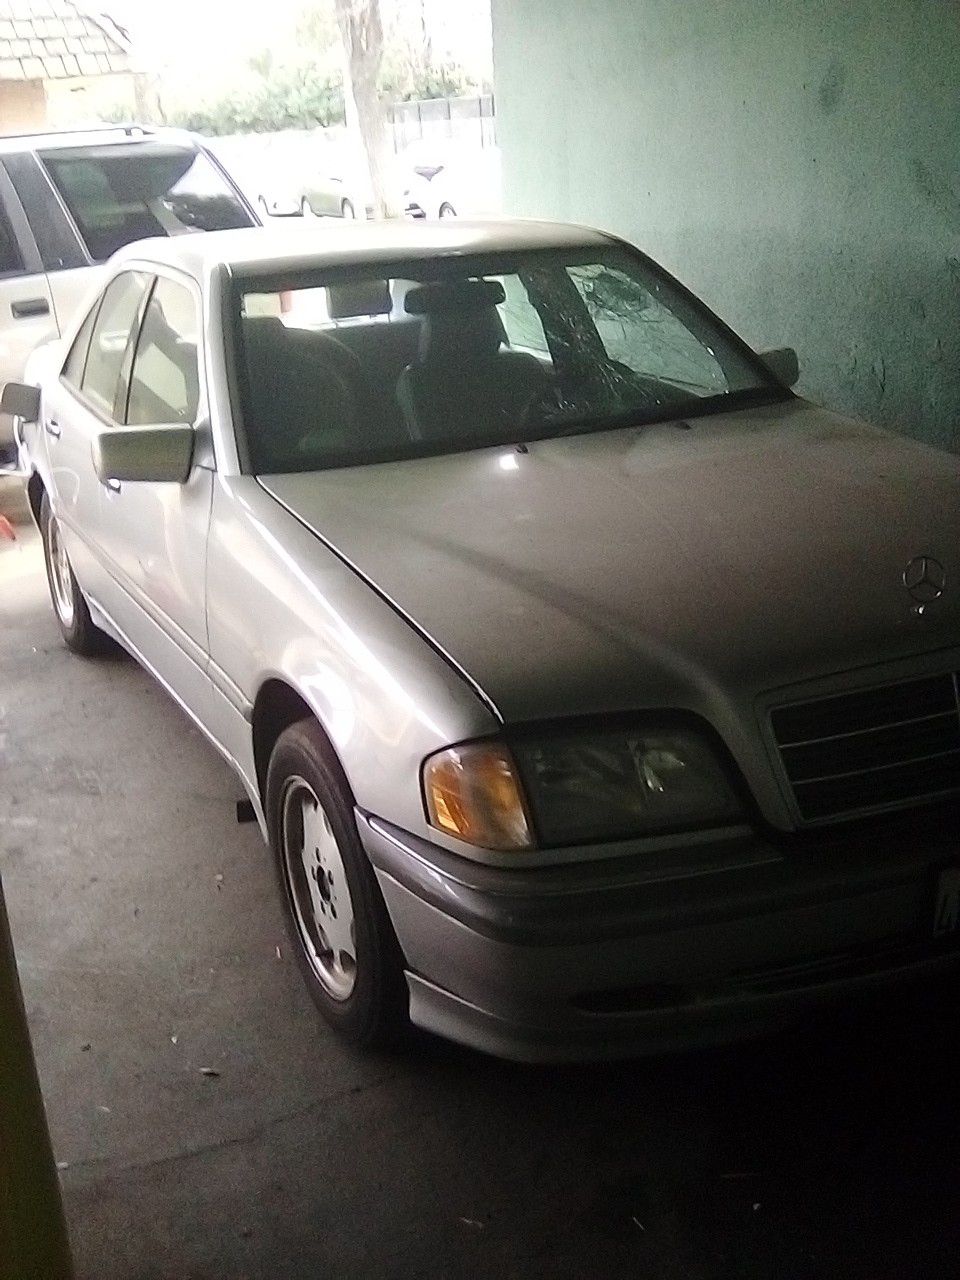 1998 Mercedes C230 (Parting out)